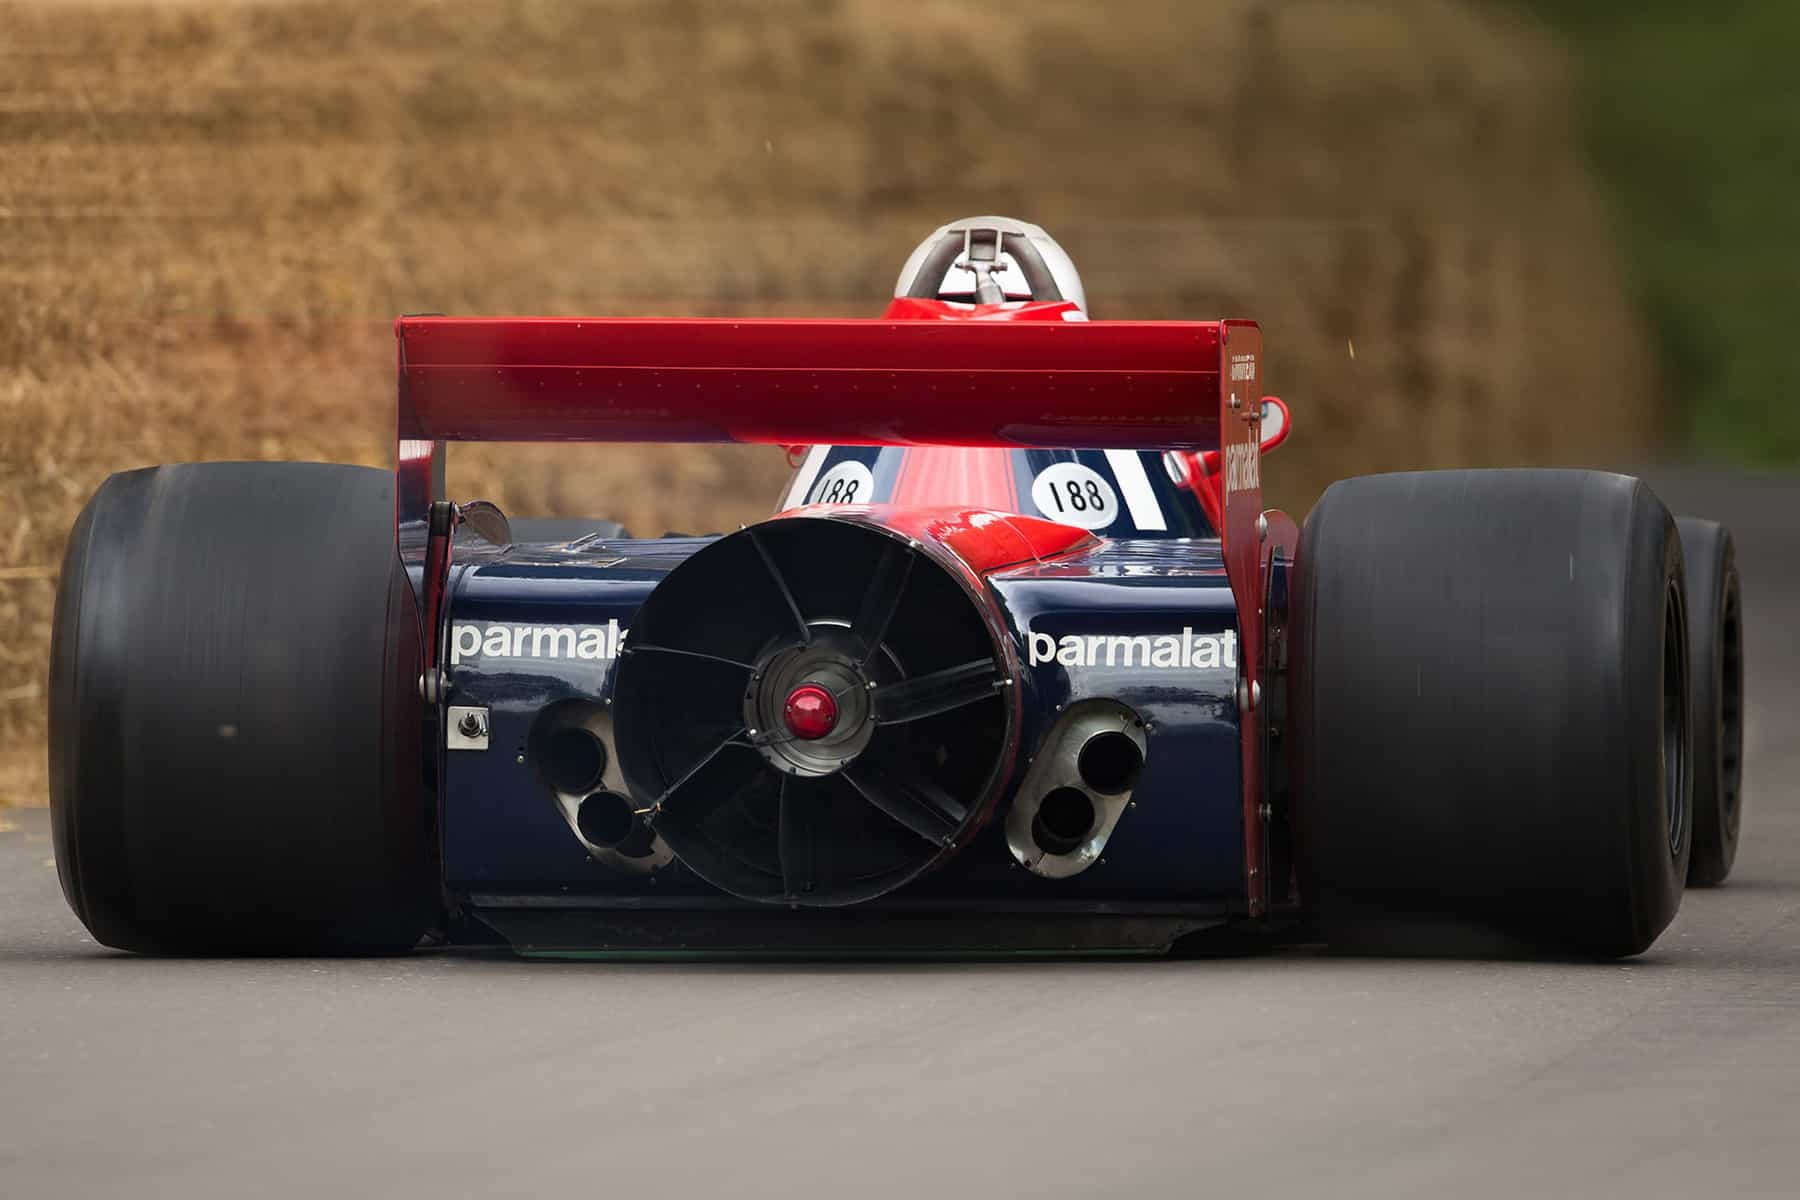 The back of the Brabham BT46.